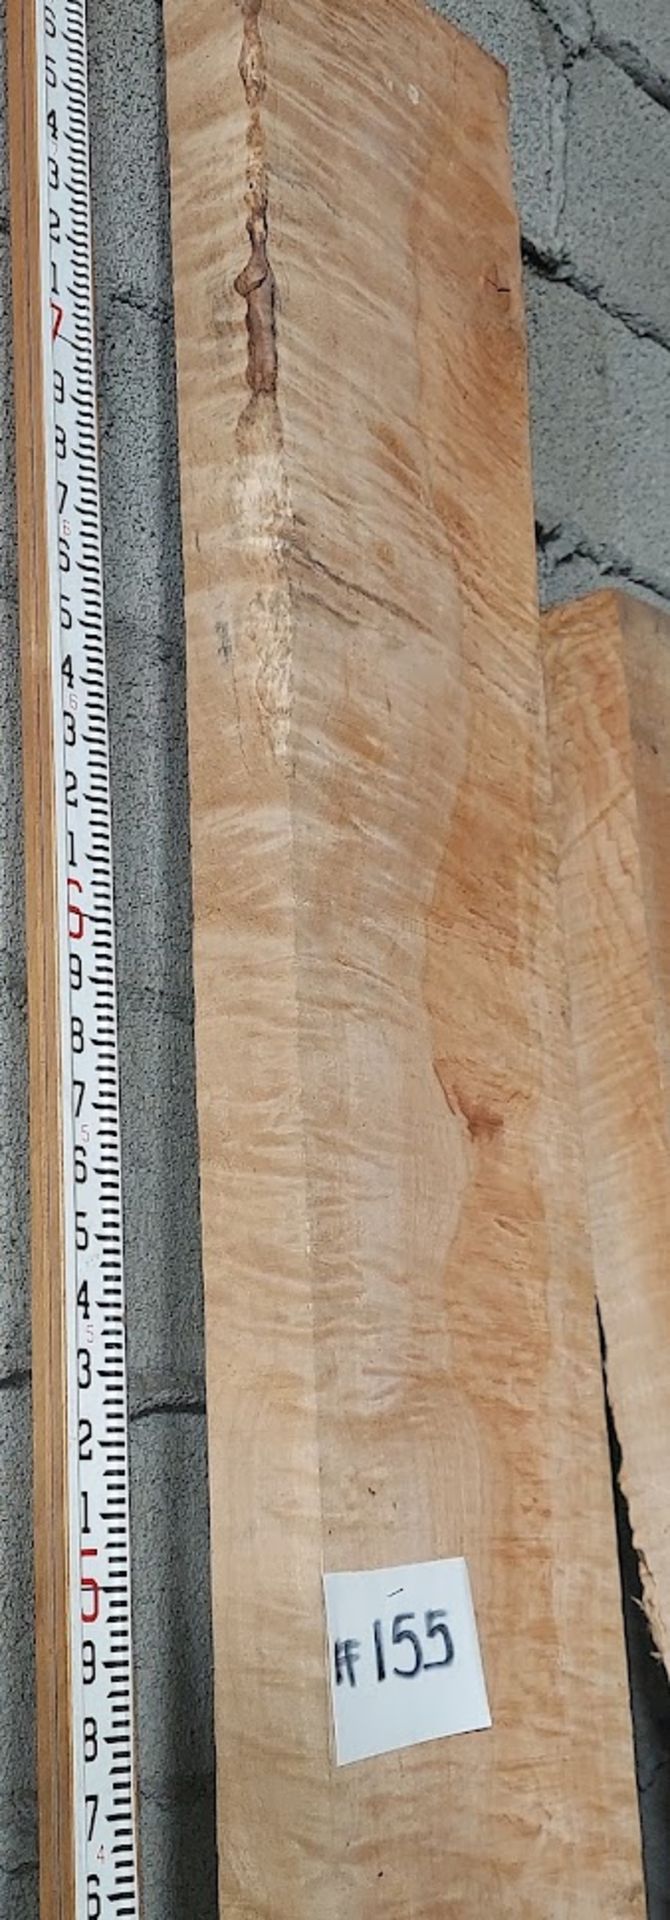 Maple Hardwood Lumber Slab, Size is approx. 96" x 9-1/2" x 2-5/8" Thick, Curly - Image 3 of 3